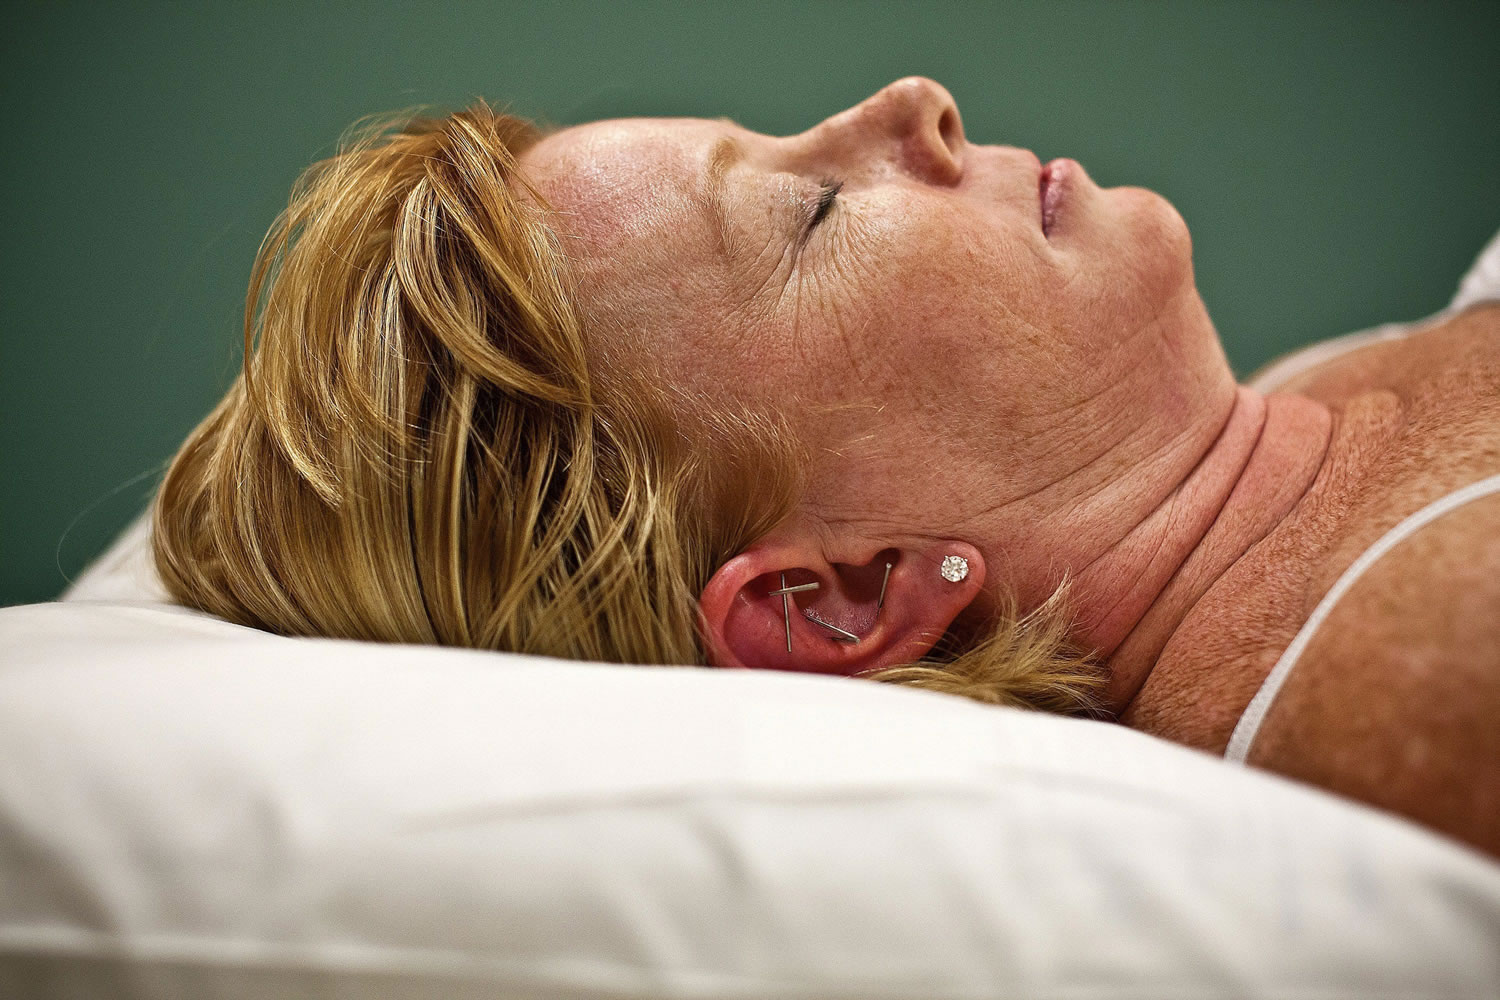 Kim Ricci relaxes with acupuncture needles in her ear while receiving a treatment at The Gynecologic Cancer Center in Orlando in May.